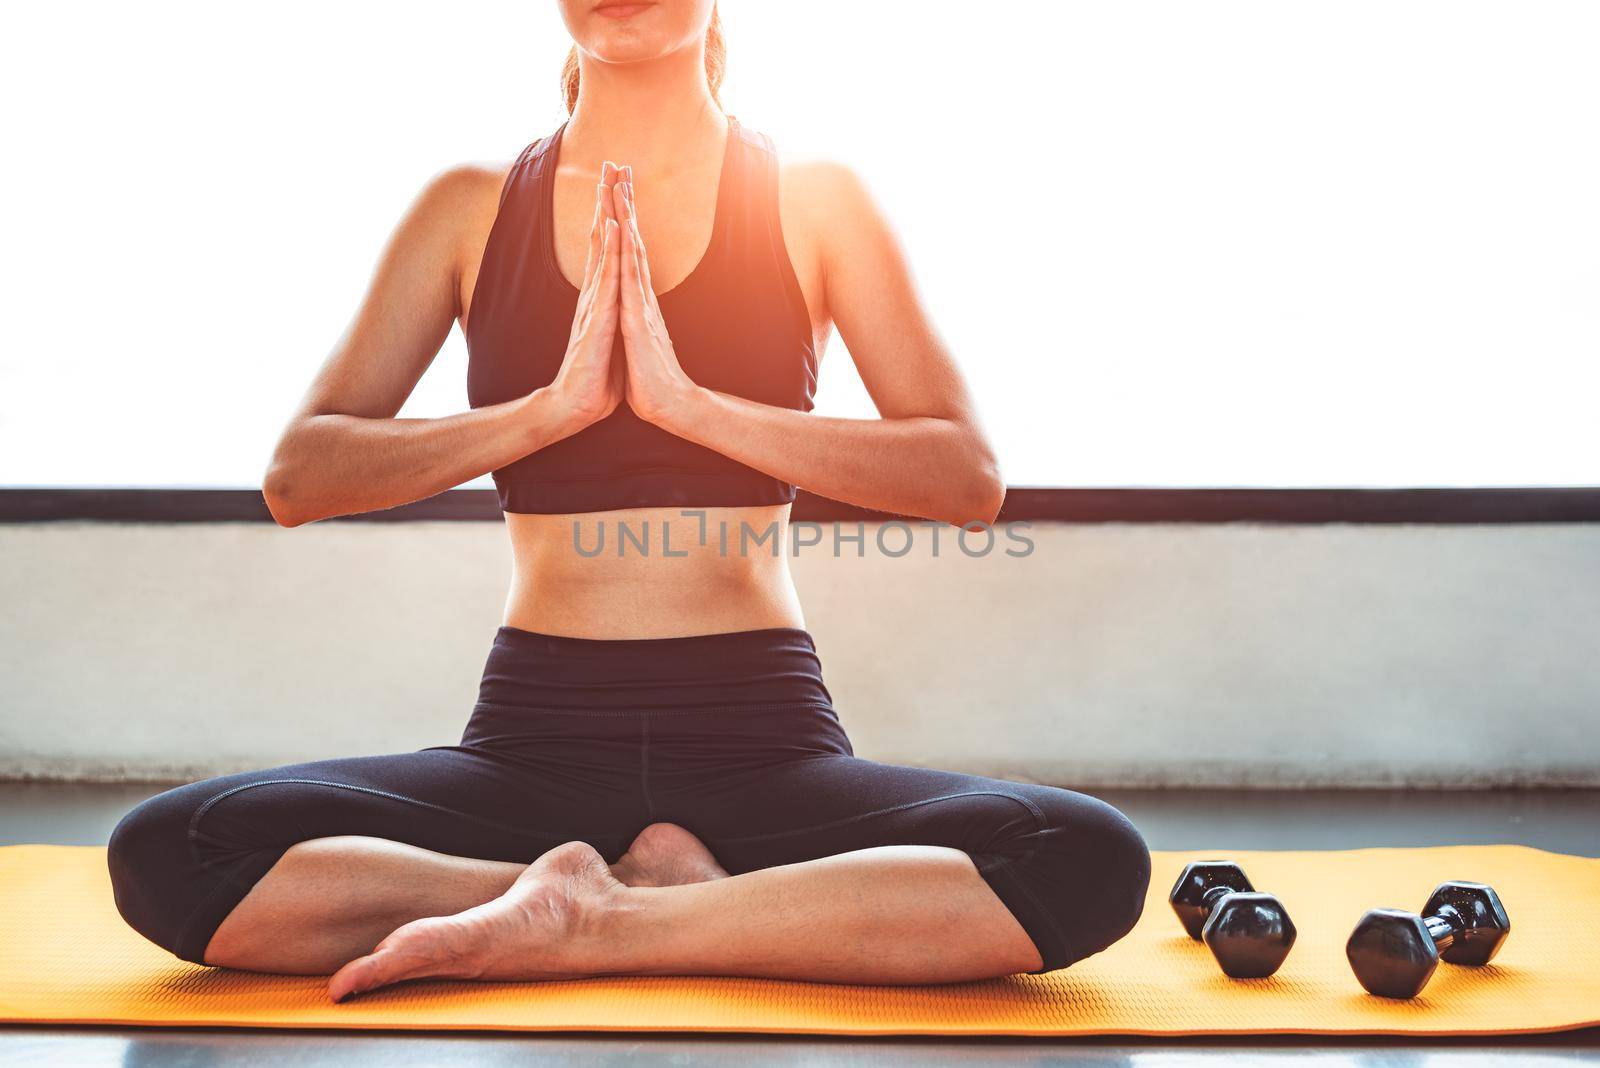 Front view beauty woman doing yoga and raise hand or pay obeisance in fitness workouts training gym center.  Lifestyle sport woman sitting on mat with sport equipment and exercise dumbbells background